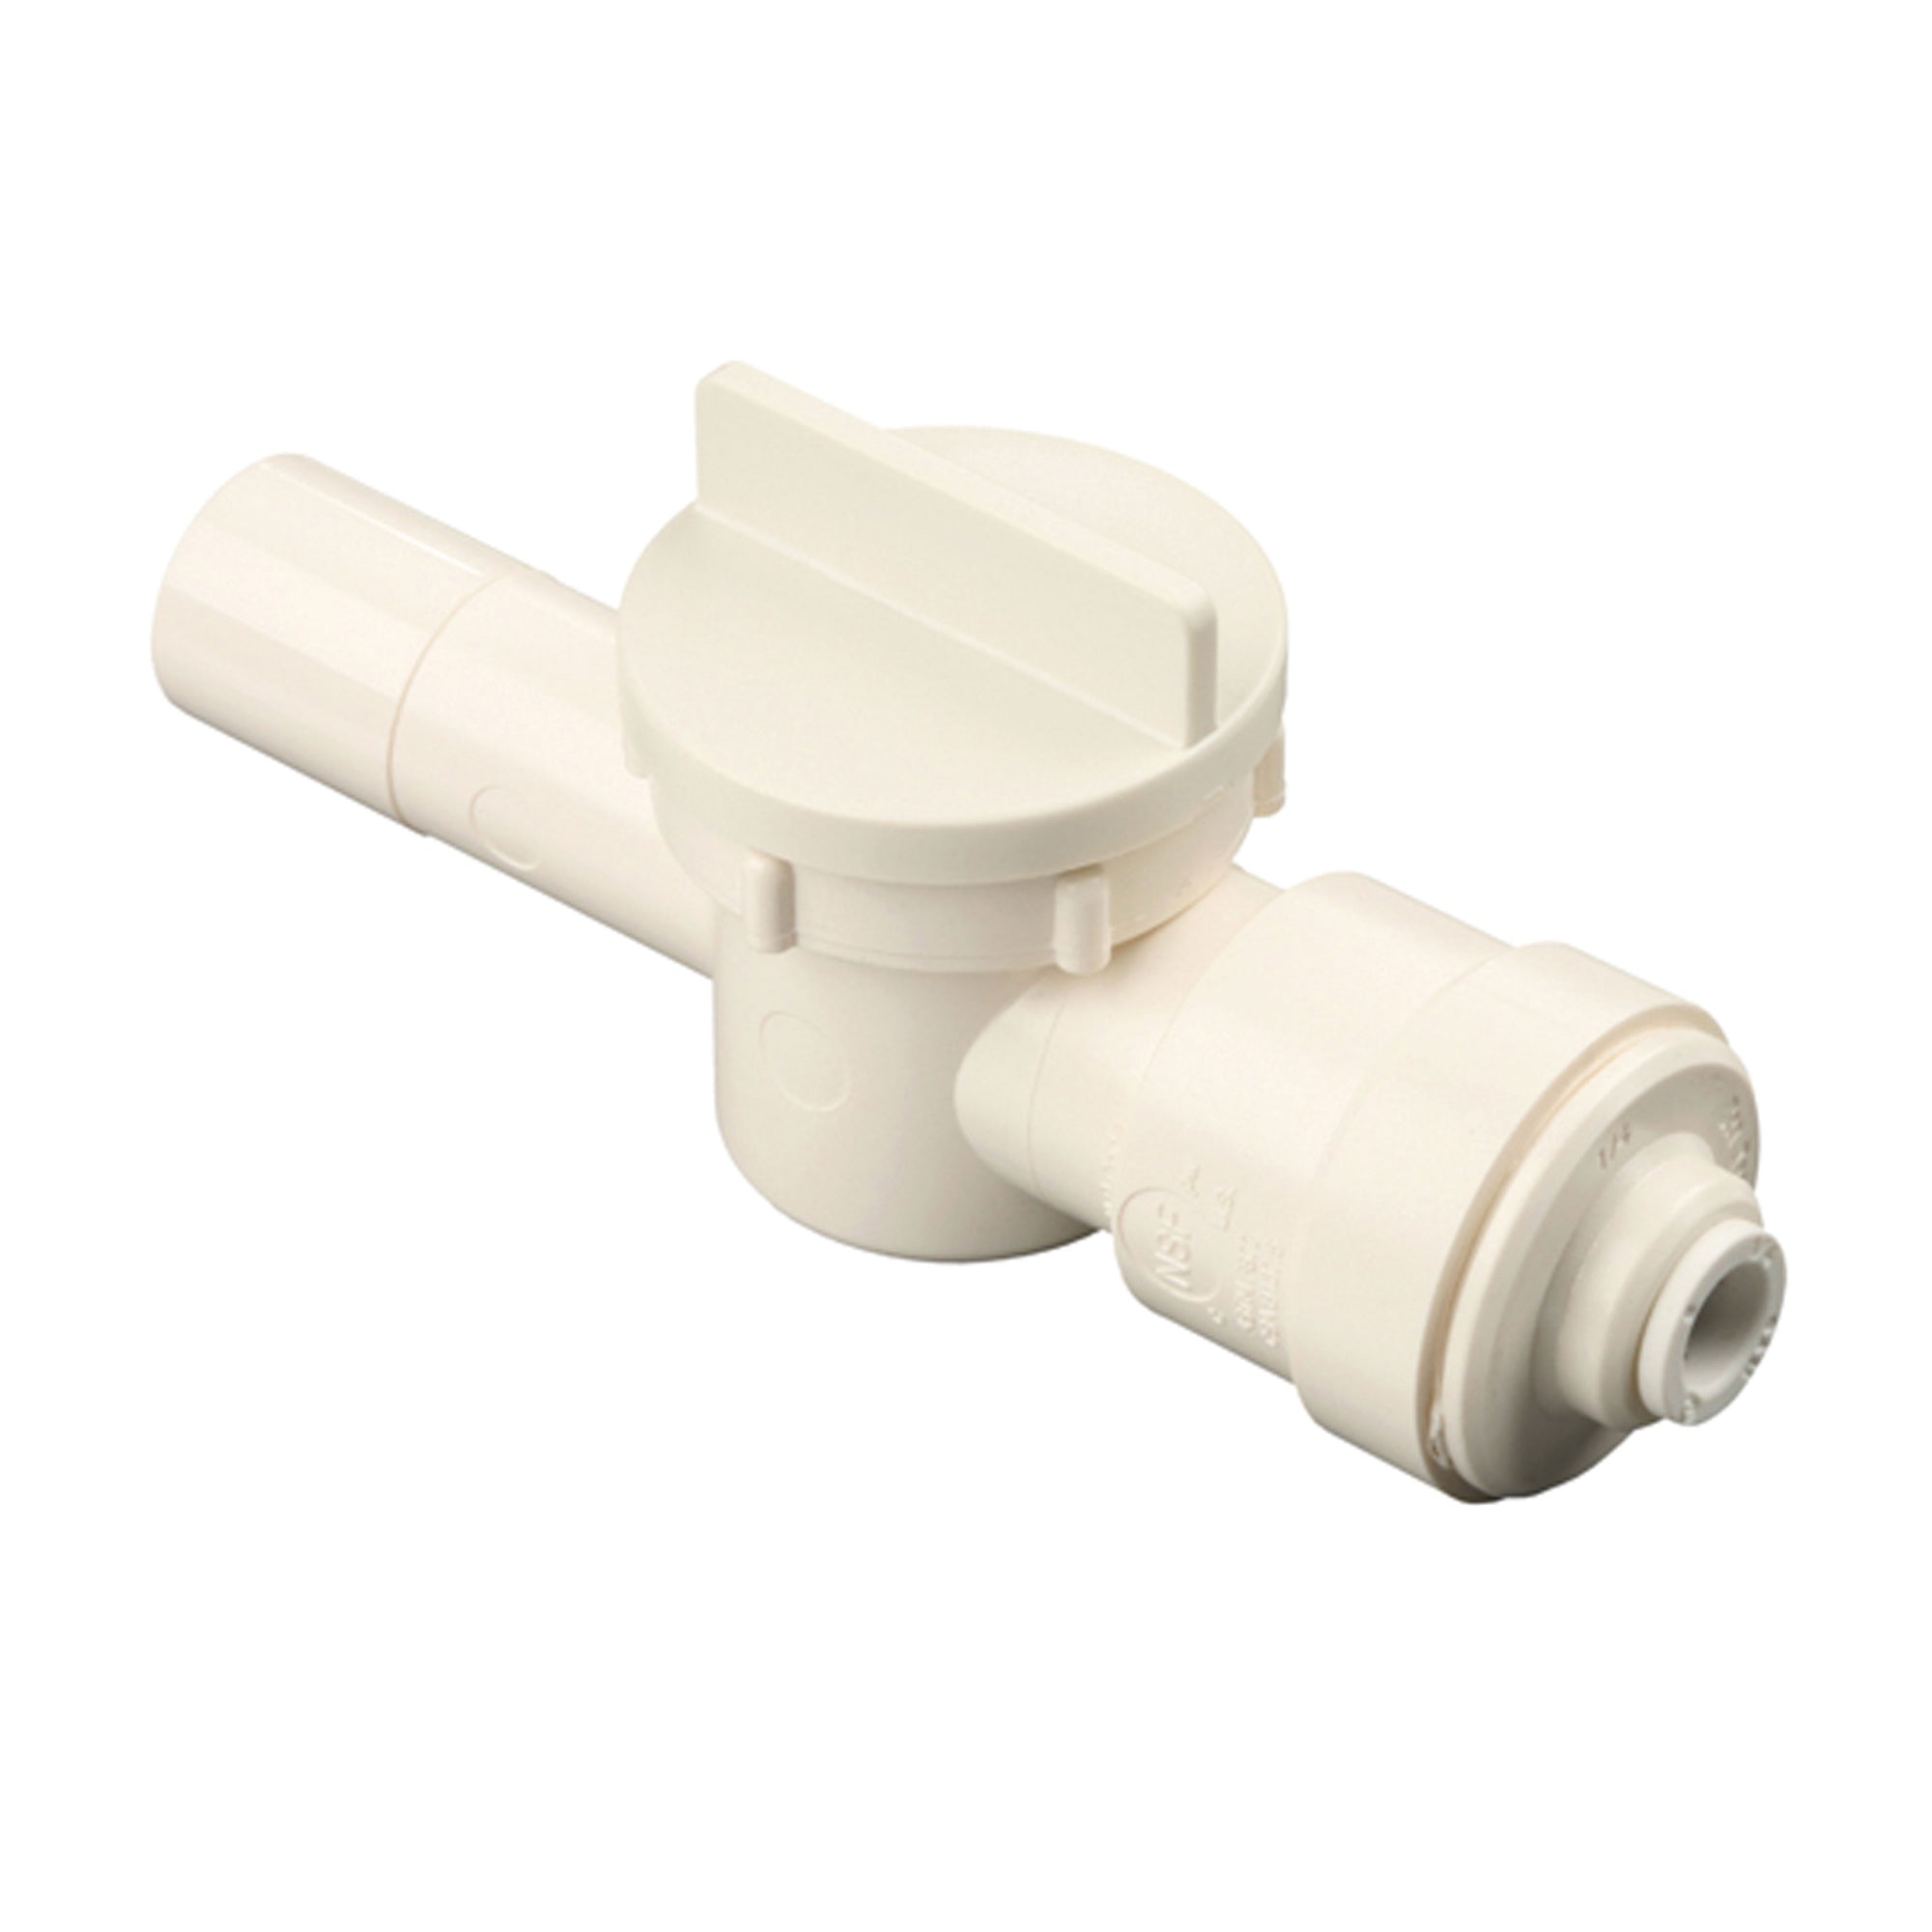 Watts 3543R-1004 AquaLock Reducing Stackable Valve - 1/2" CTS x 1/4" OD, Each